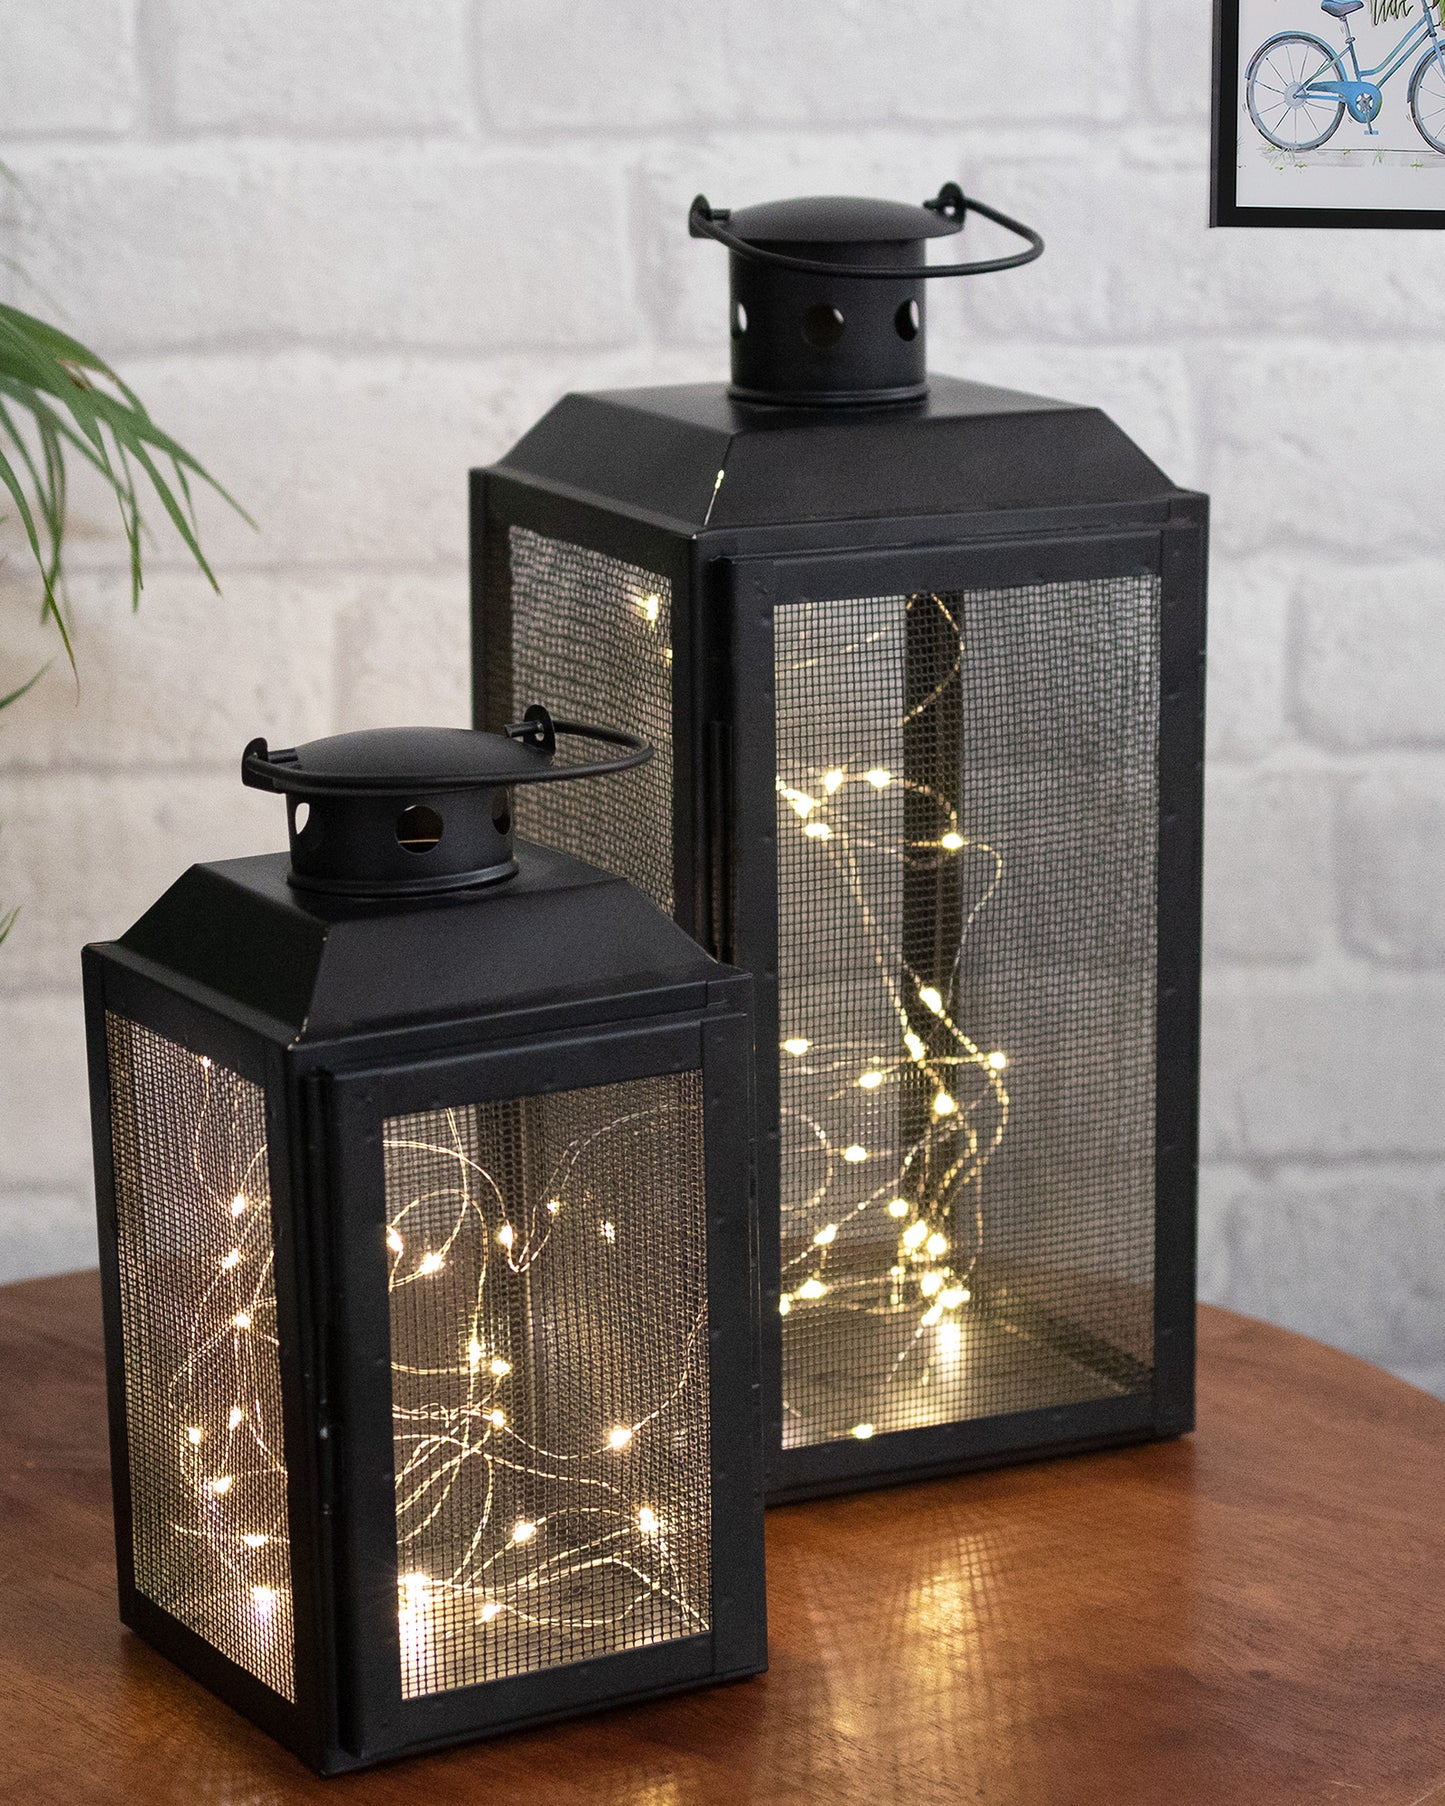 Set of 2 Iron Lantern and Candle Tealight Holder for Home Decor Items With 50 Warm White LEDs for Garden Patio Landscape Decoration